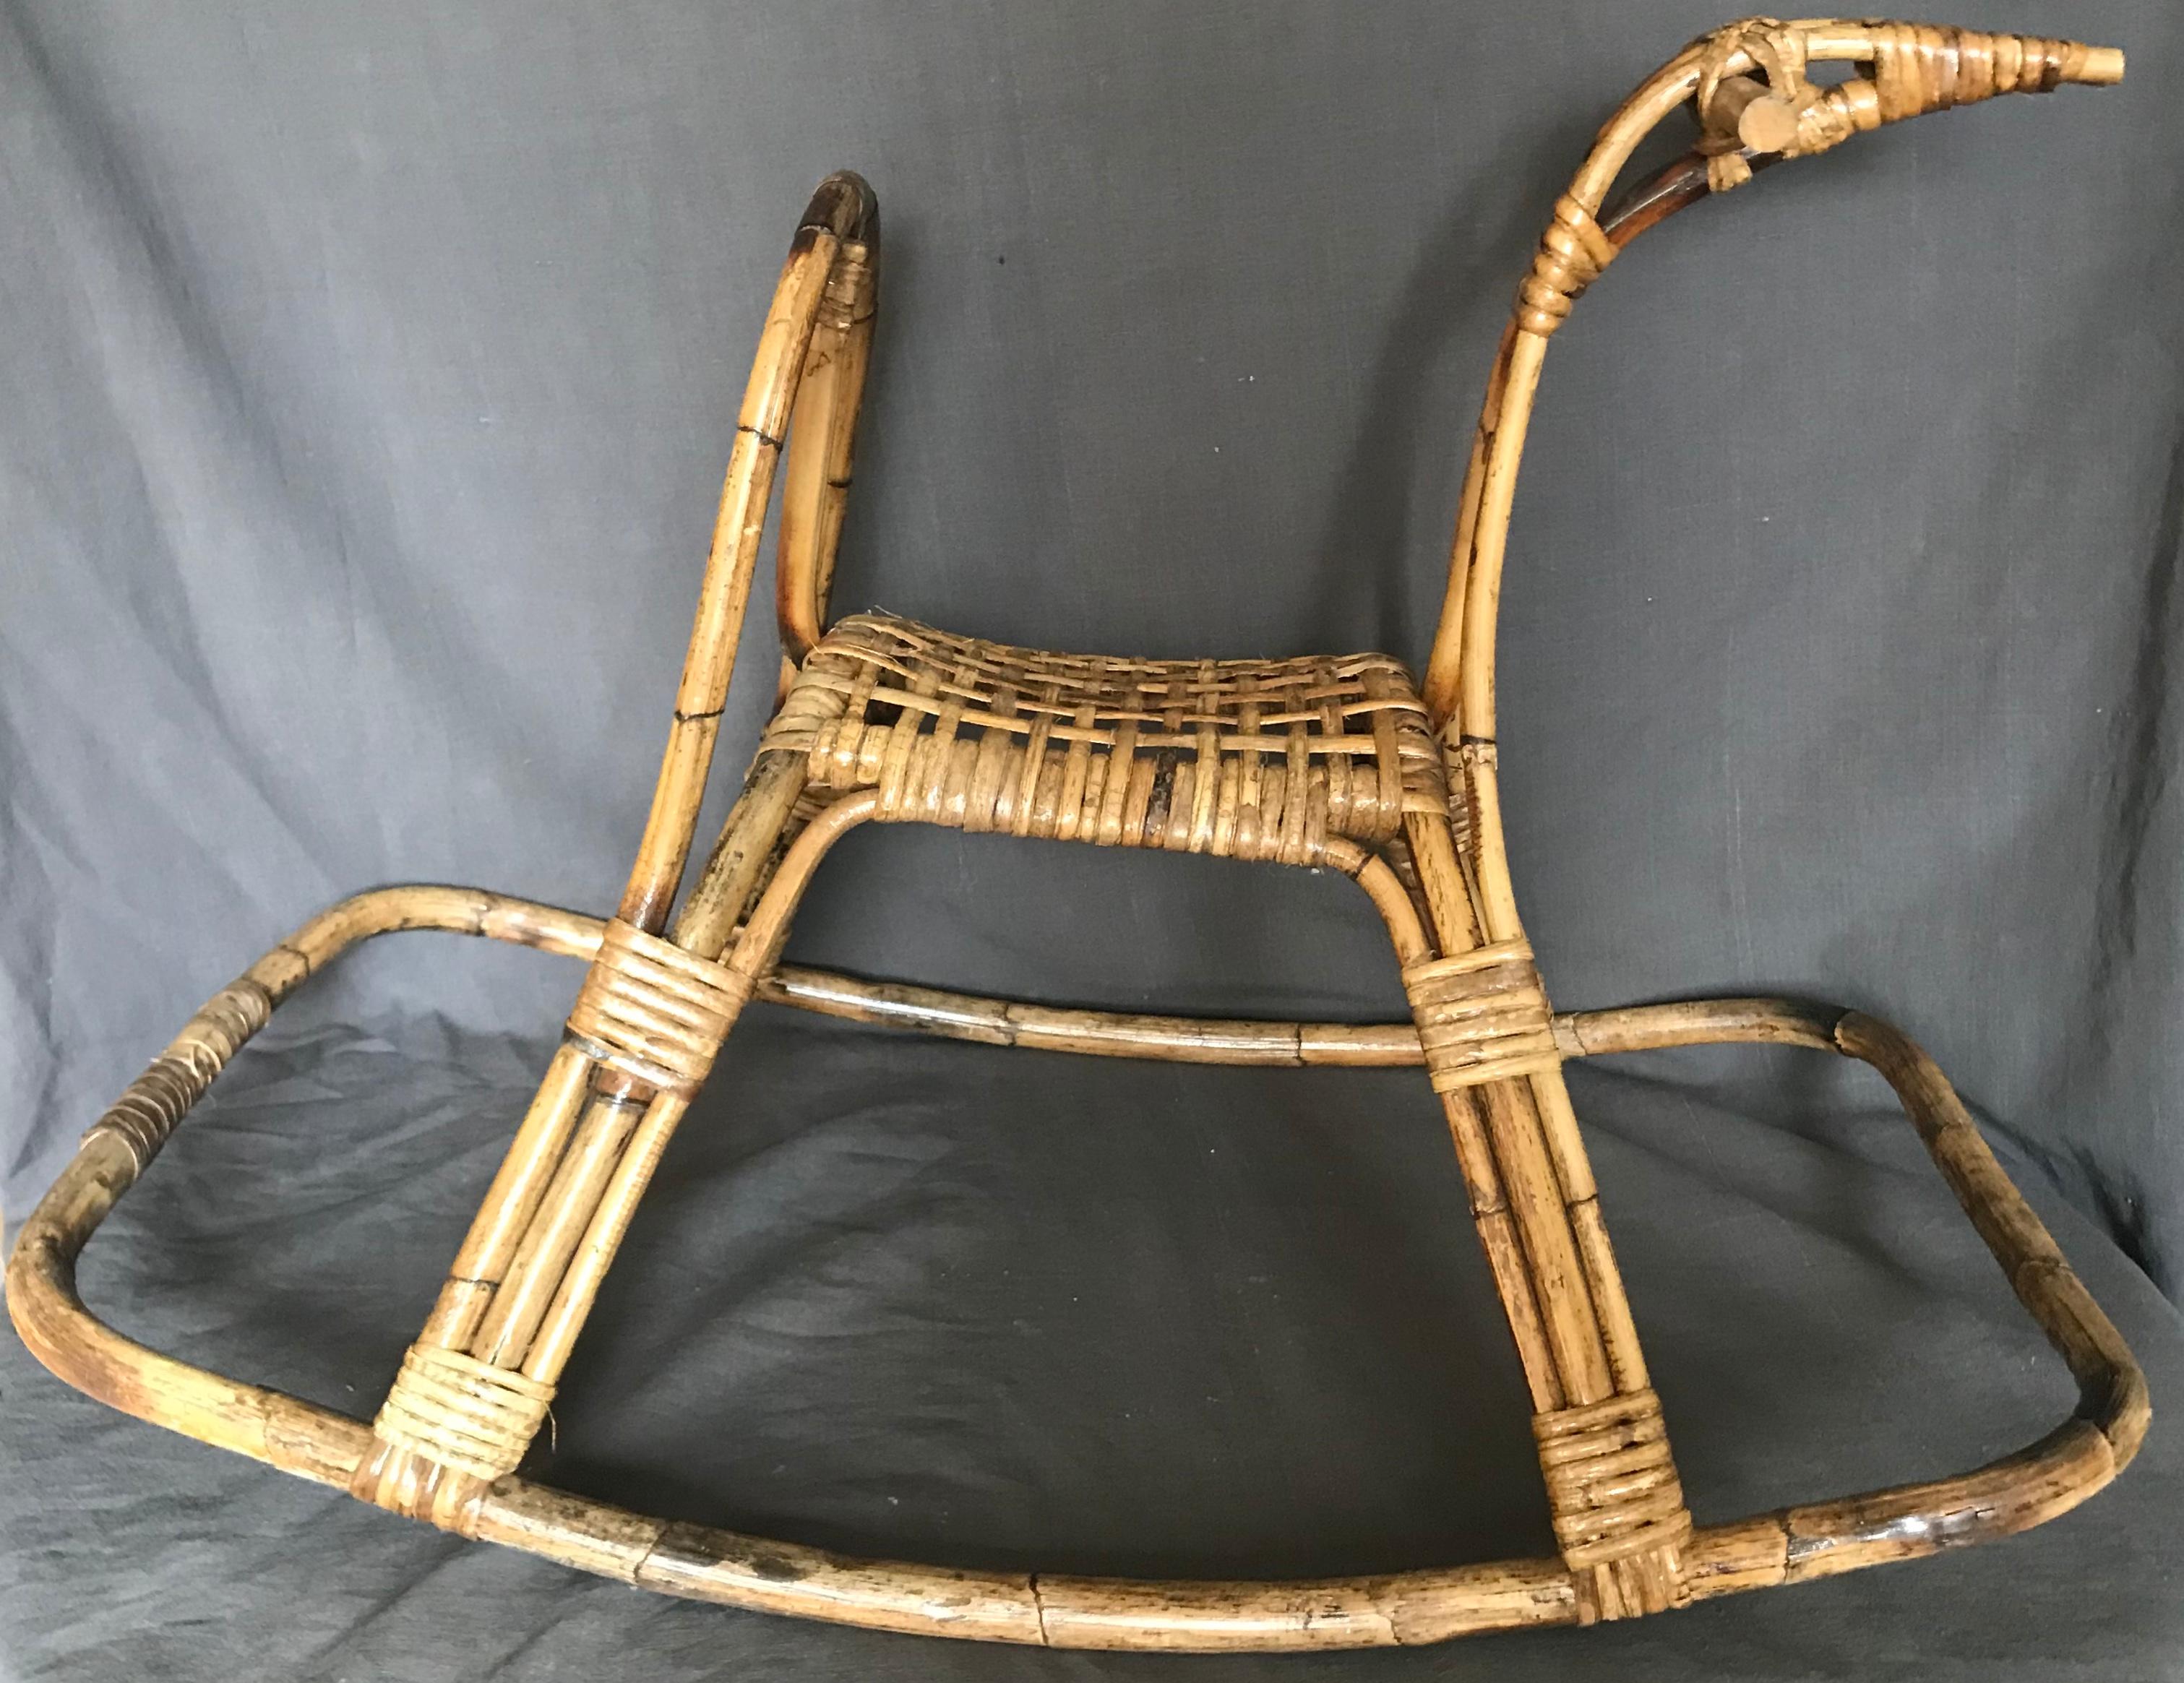 Hand-Woven Italian Midcentury Rocking Horse Sculpture For Sale